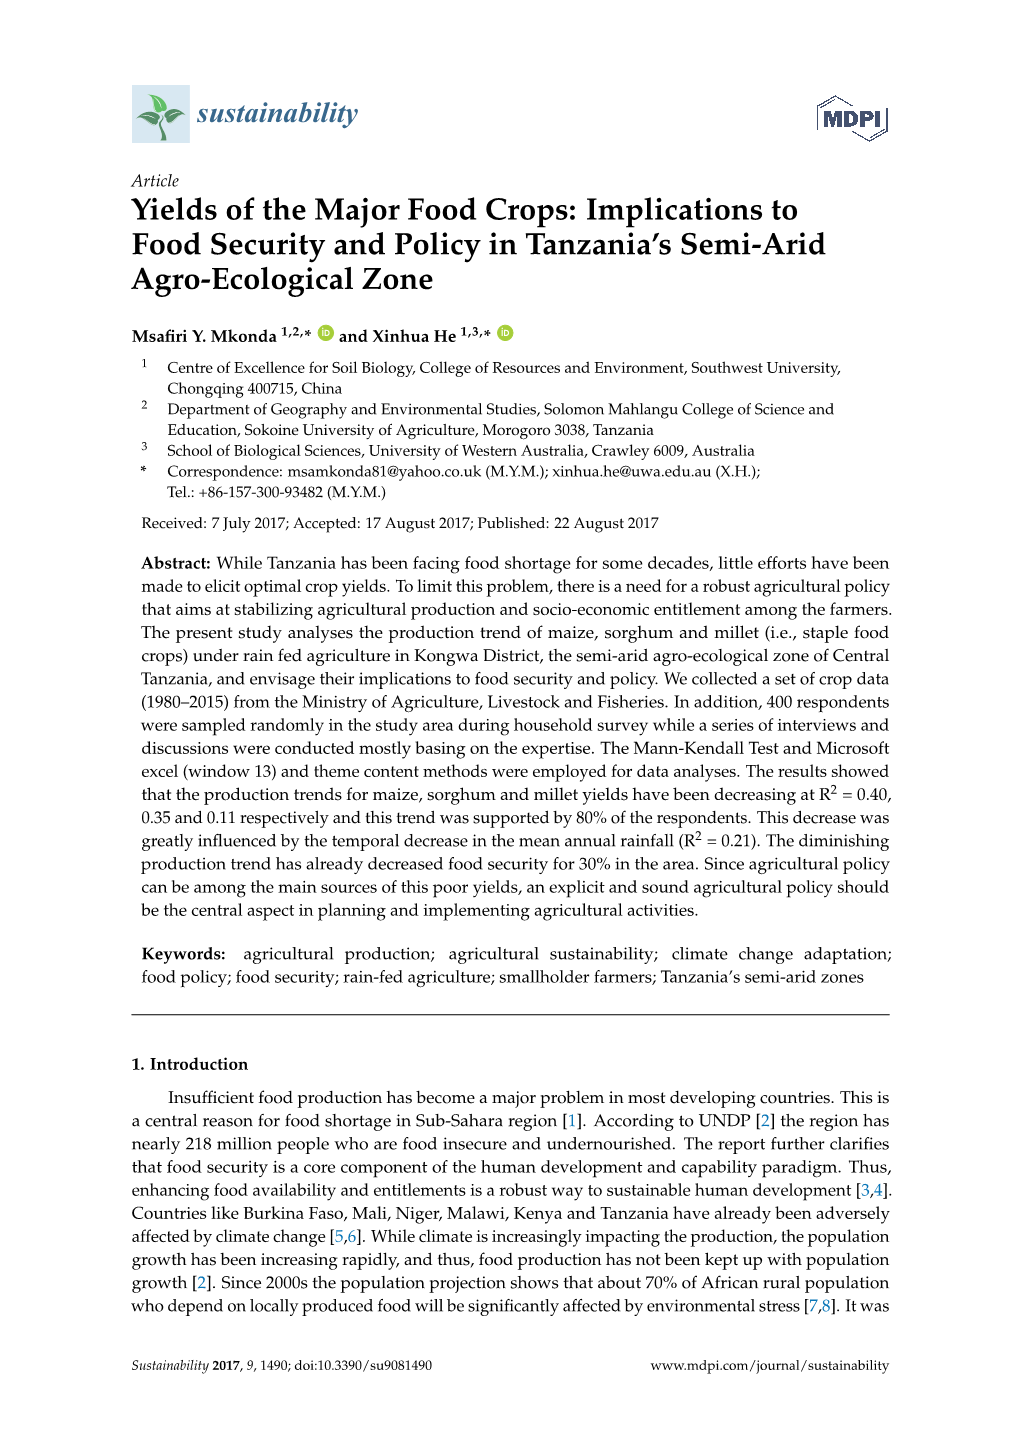 Implications to Food Security and Policy in Tanzania's Semi-Arid Agro